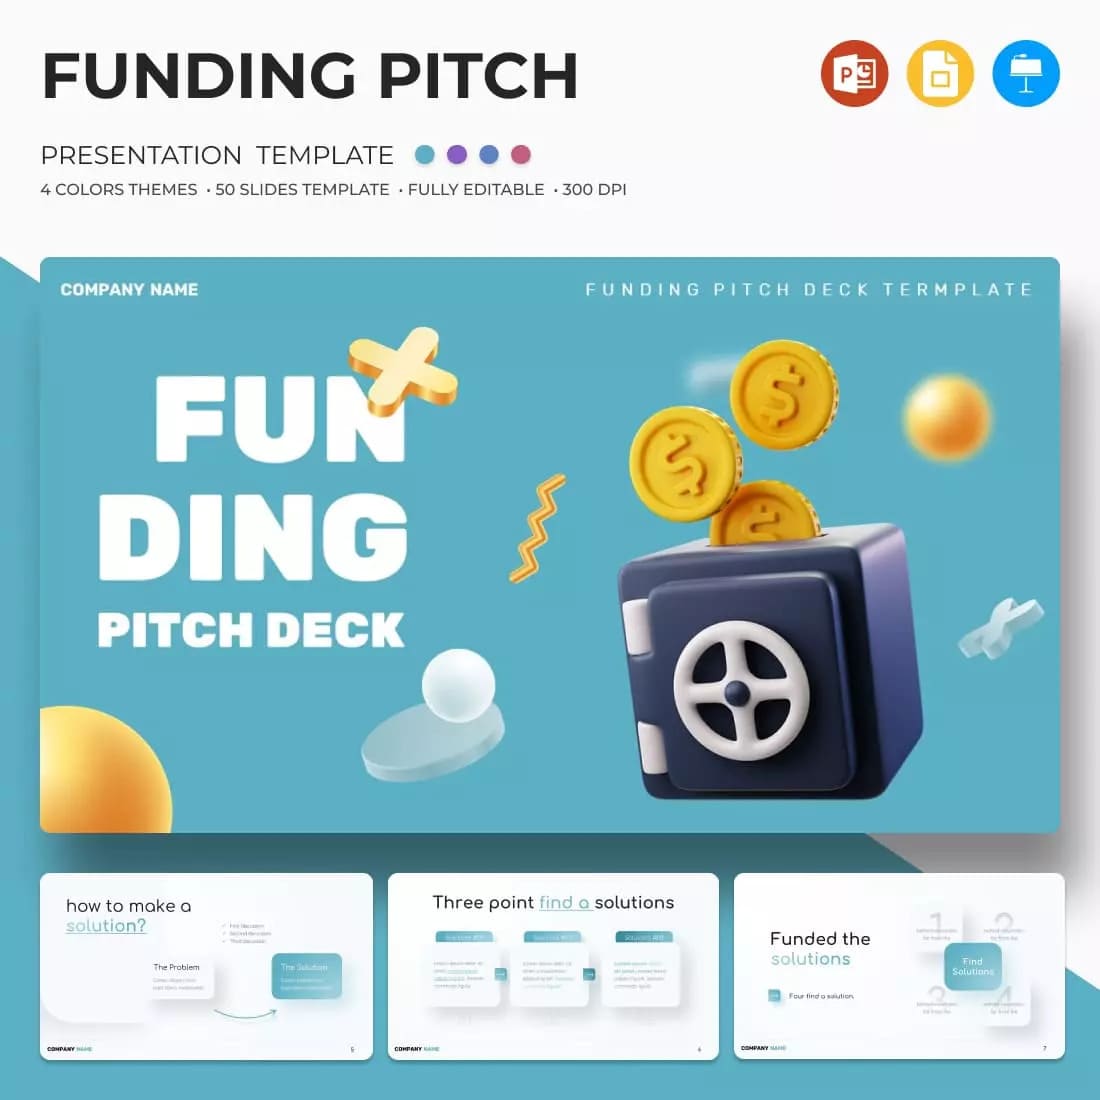 Funding Pitch Presentation Template Preview image.